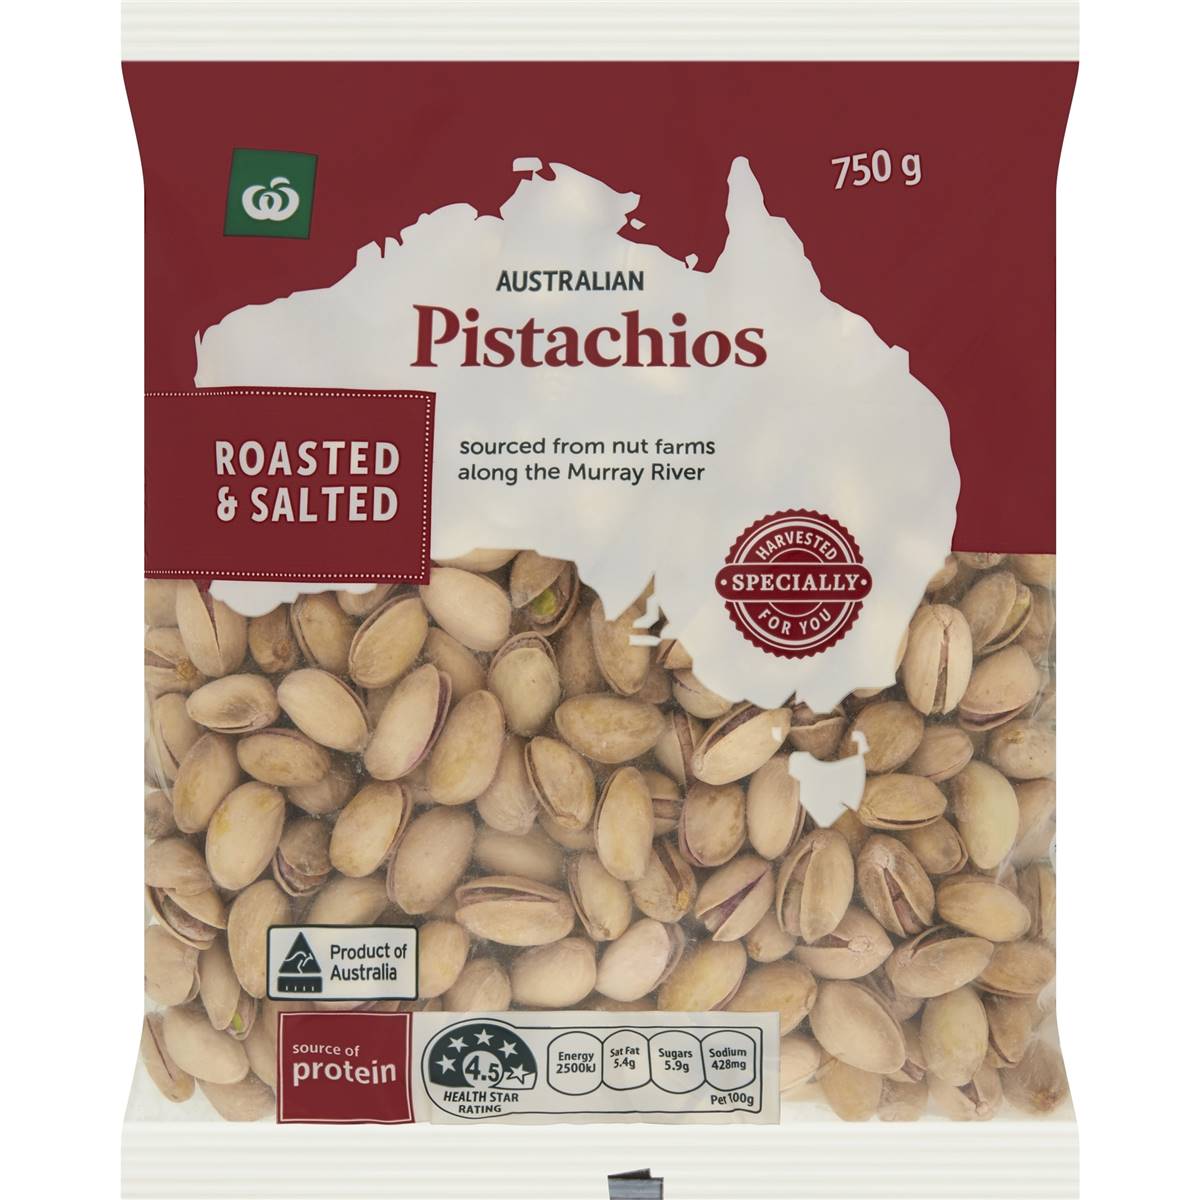 Calories in Woolworths Australian Pistachios Roasted & Salted